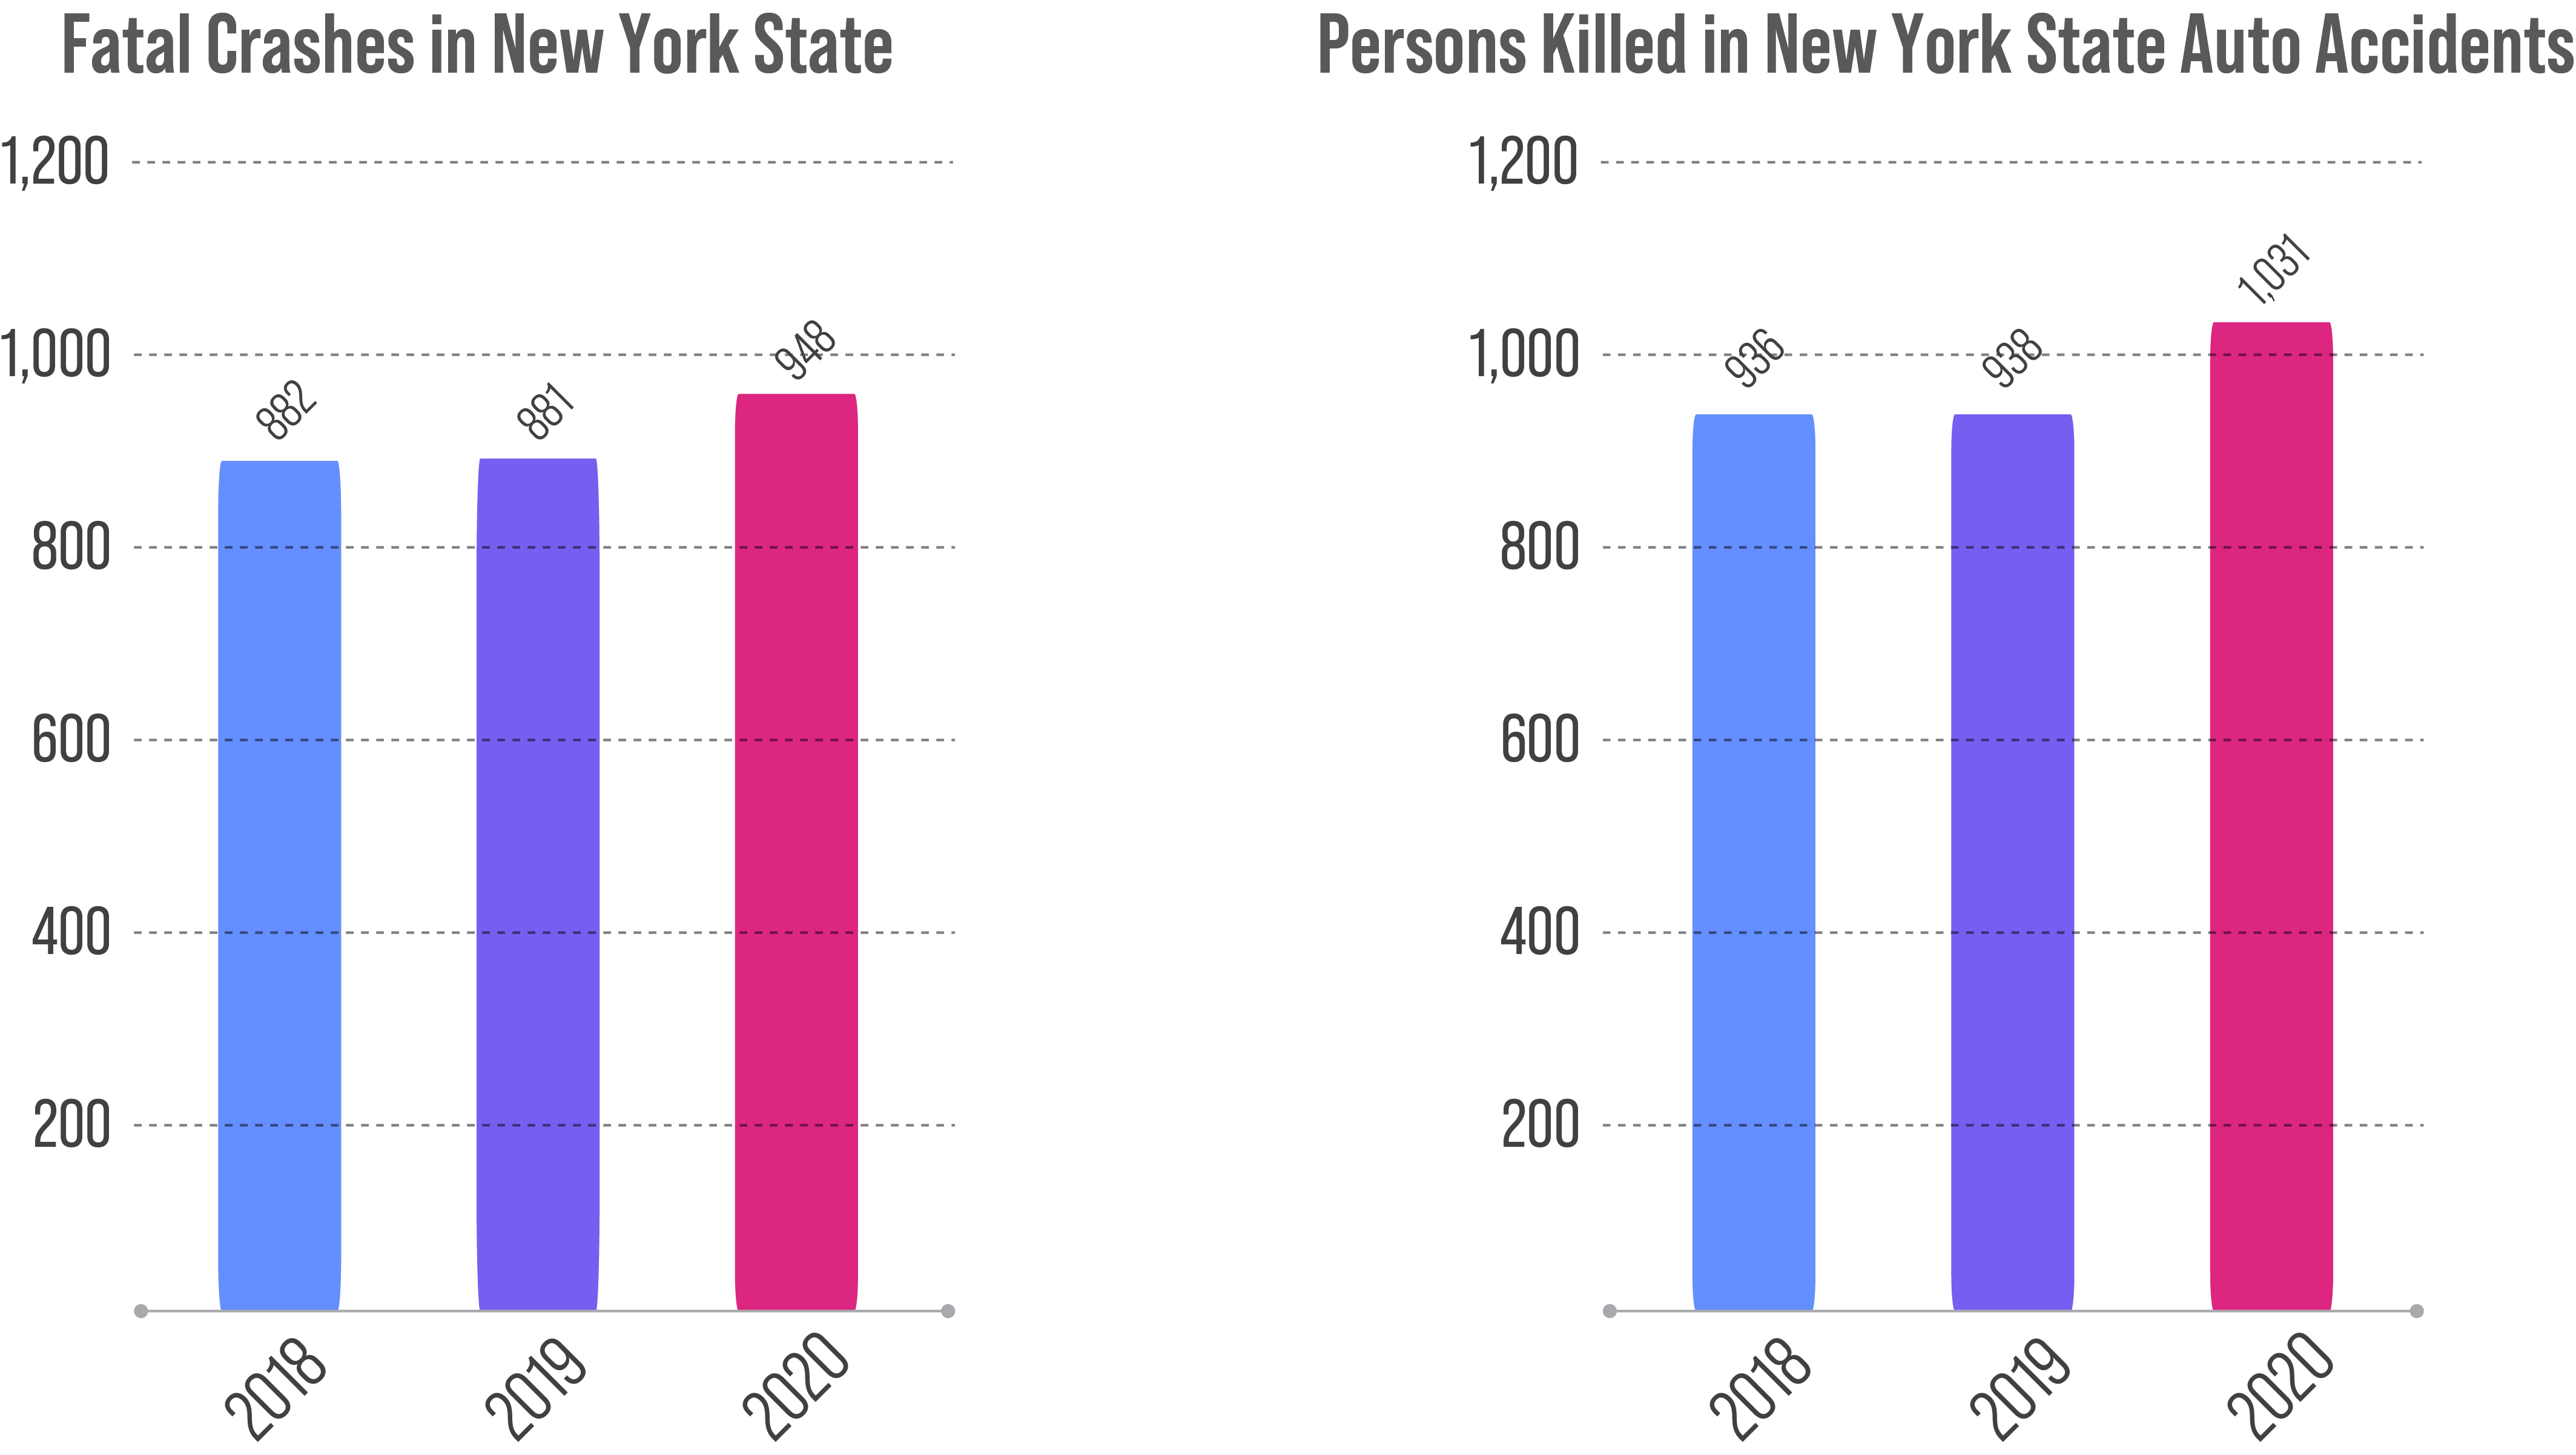 fetal crashes in NY state and Persons kills in Auto Accidents 2018 - 2020